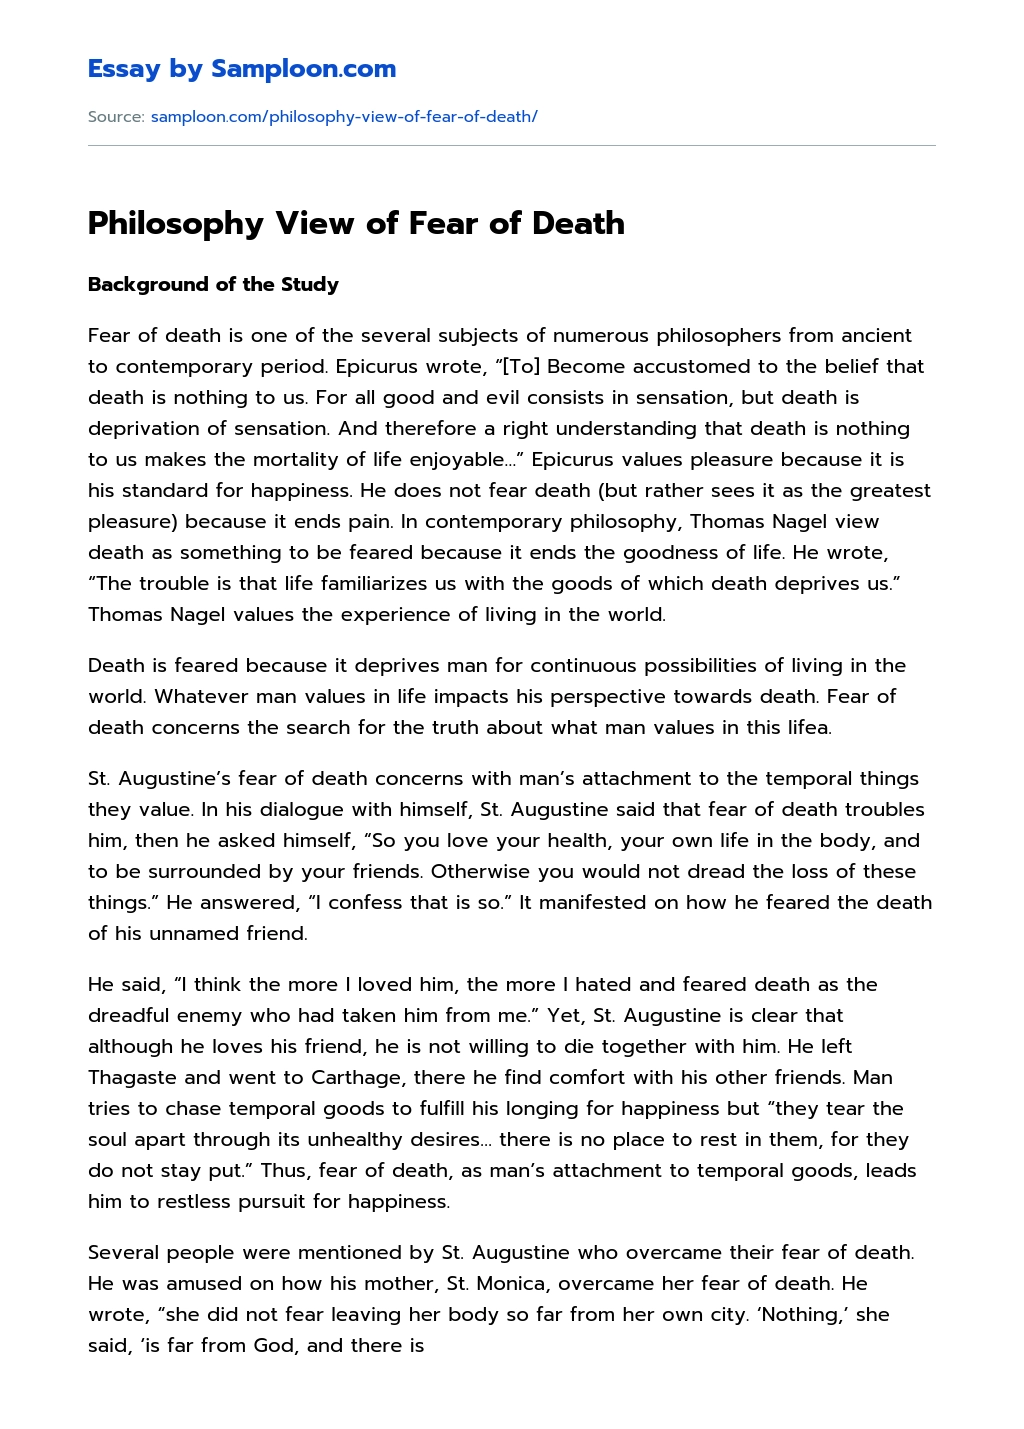 Philosophy View of Fear of Death essay